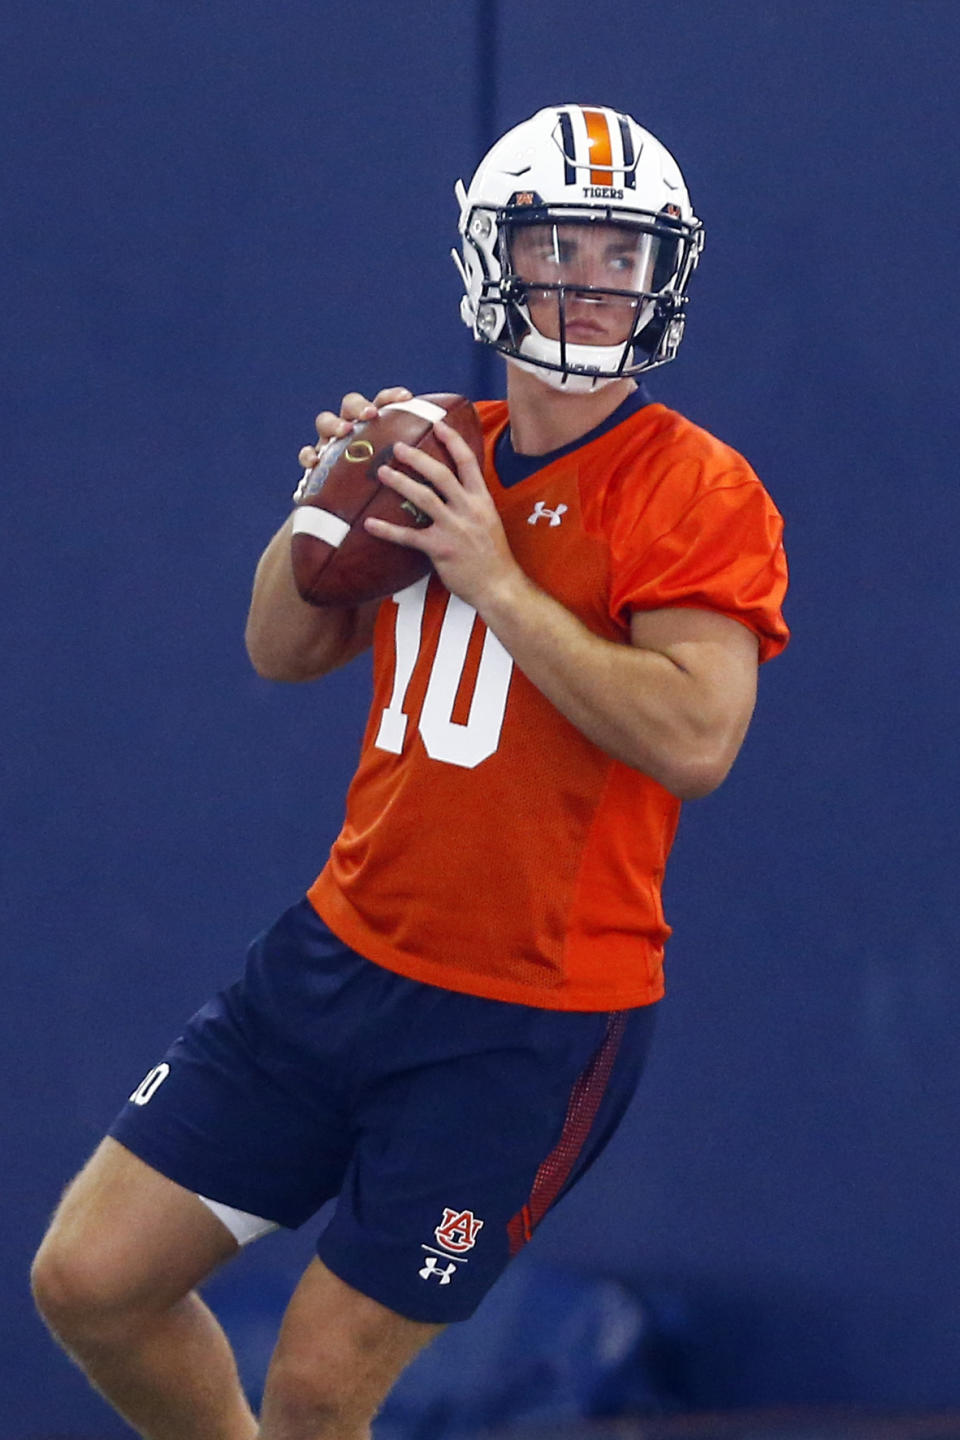 FILE - In this Aug. 2, 2019, file photo, Bo Nix throws a pass during Auburn's first practice in Auburn, Ala. He’s the nation’s No. 1 dual-threat quarterback and No. 33 overall prospect in his class according to the 247Sports Composite. (AP Photo/Butch Dill, File)